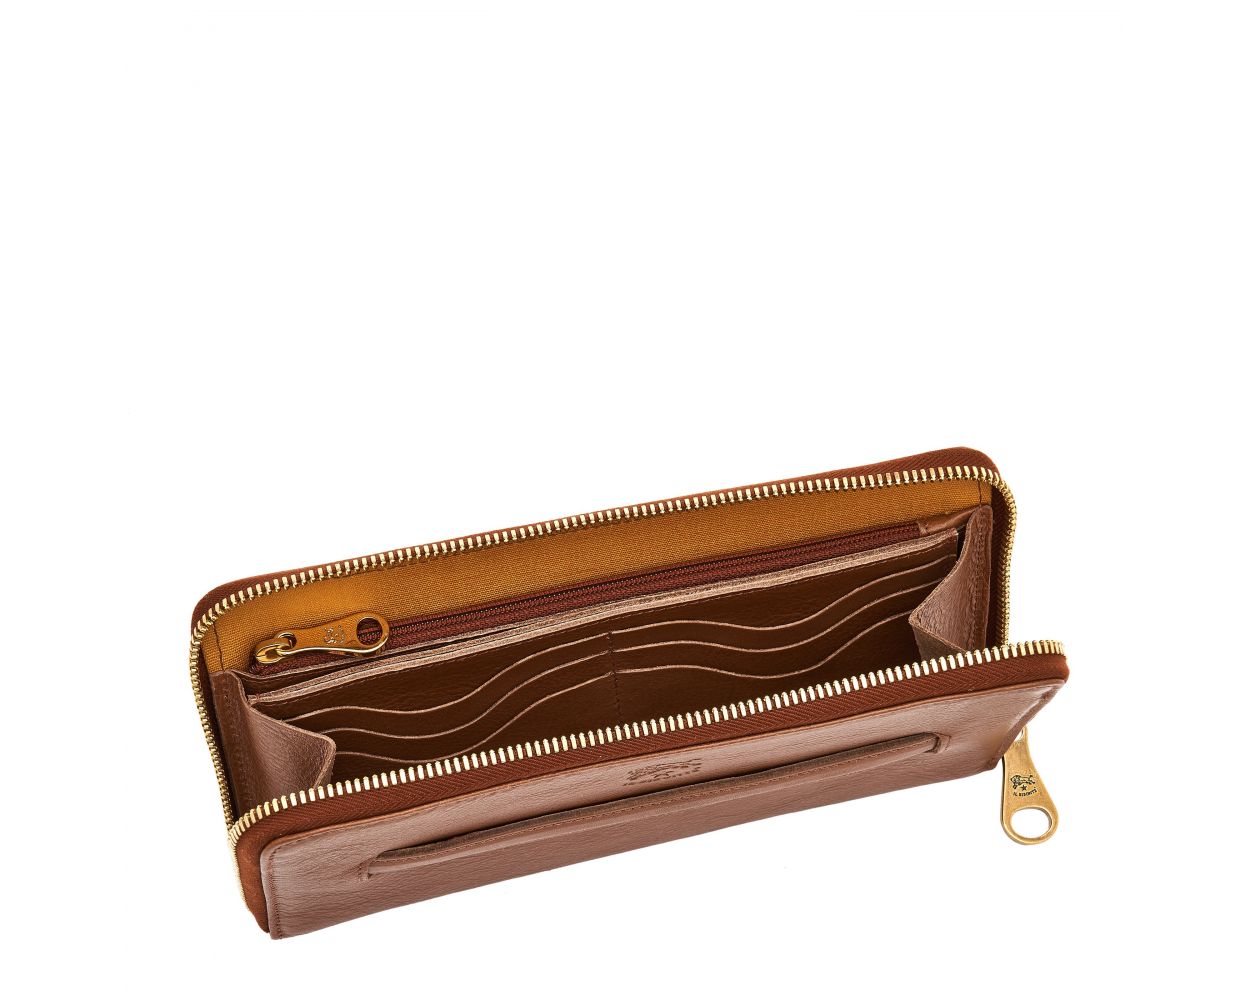 Women's Zip Around Wallet in Soft Vegetable-Tanned Cowhide Leather color - Salina line SZW045 - Chocolate